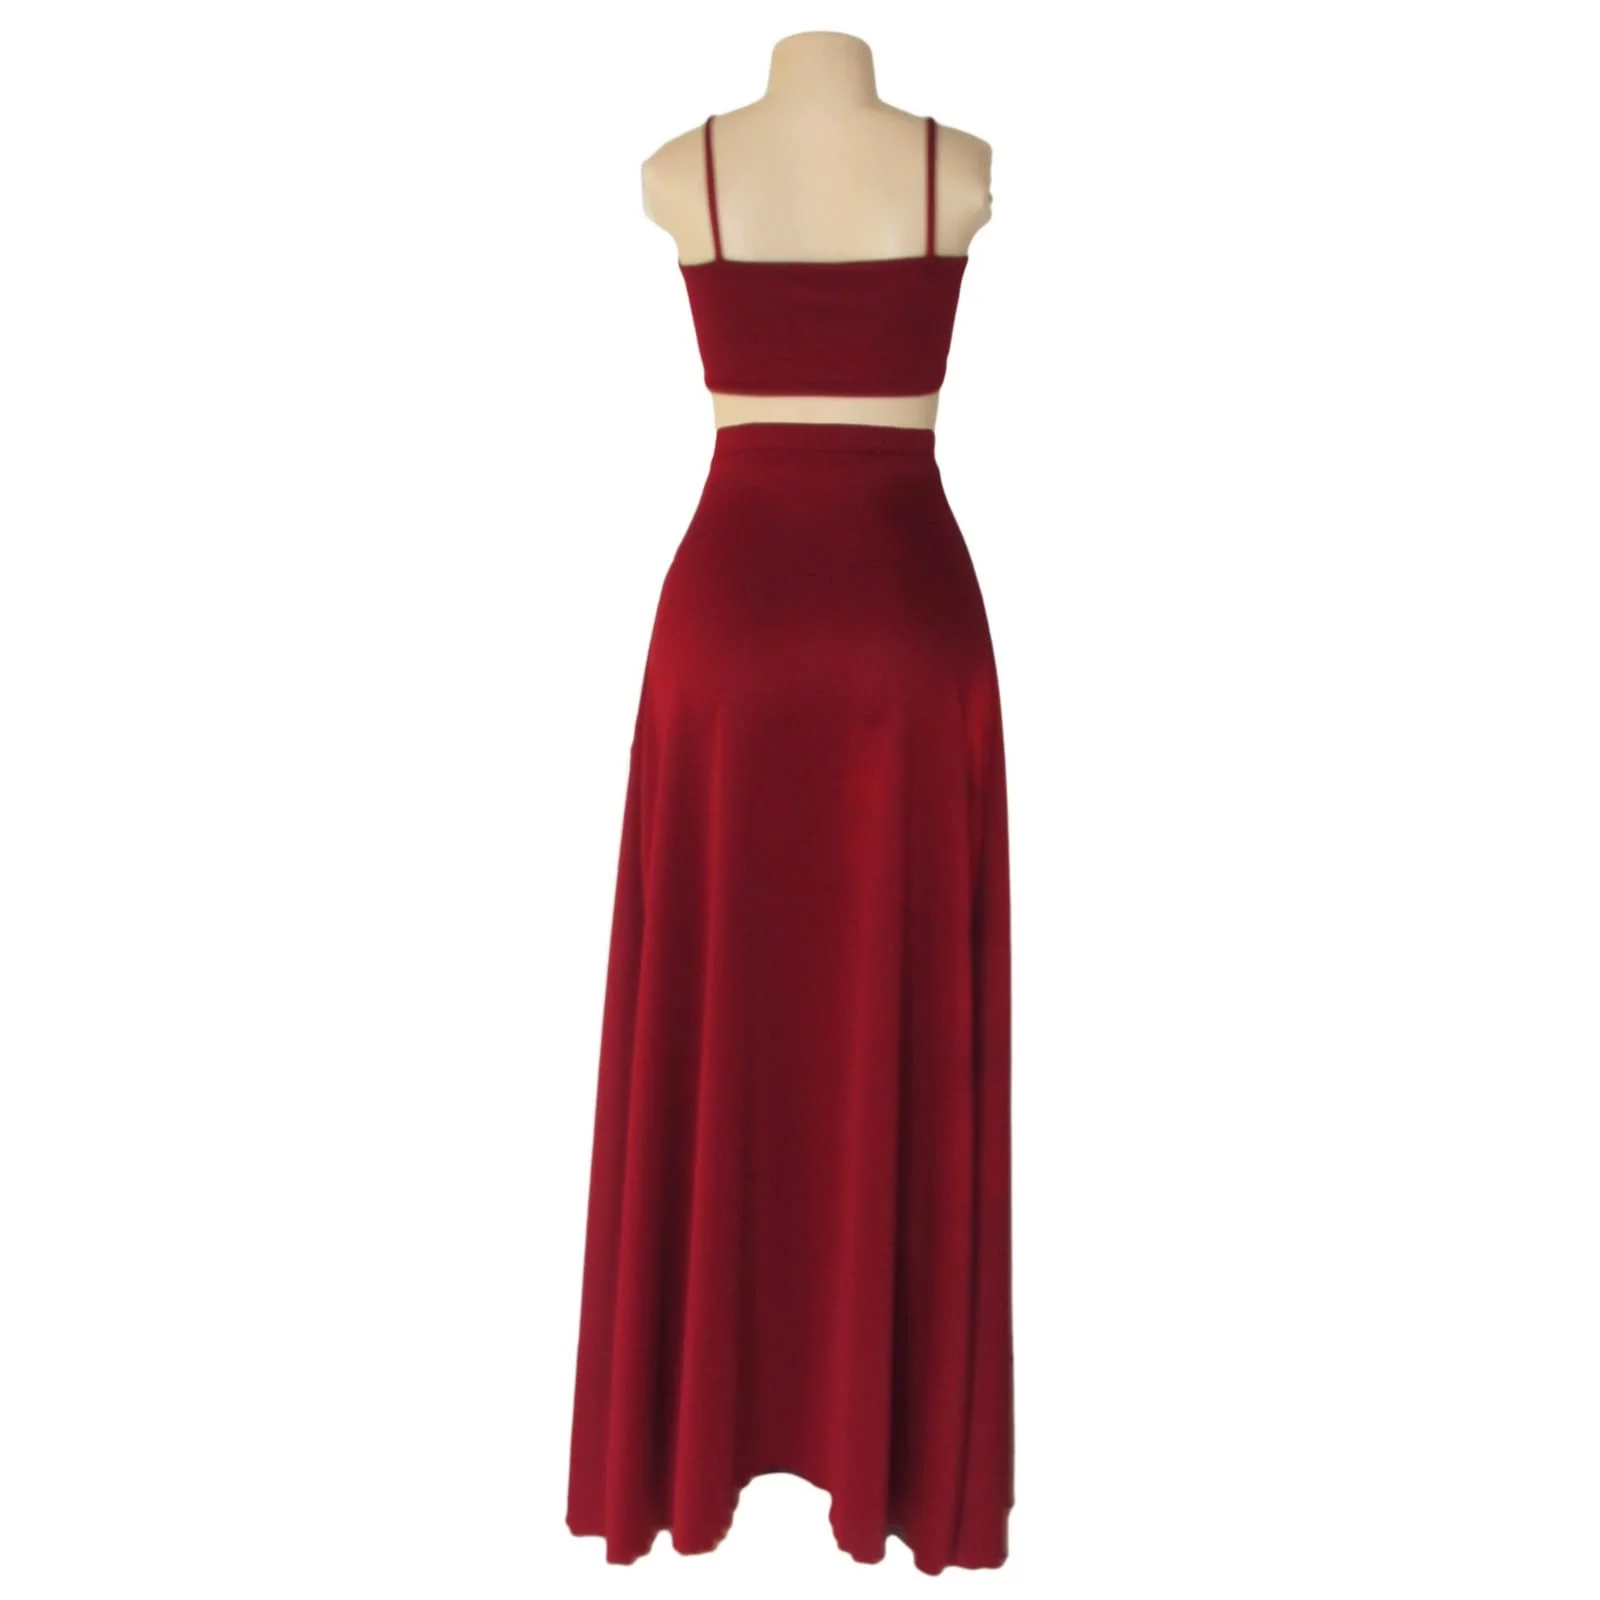 Maroon 2 piece smart casual wear 4 maroon 2 piece smart casual wear with a crop top and a long skirt with a crossed slit.